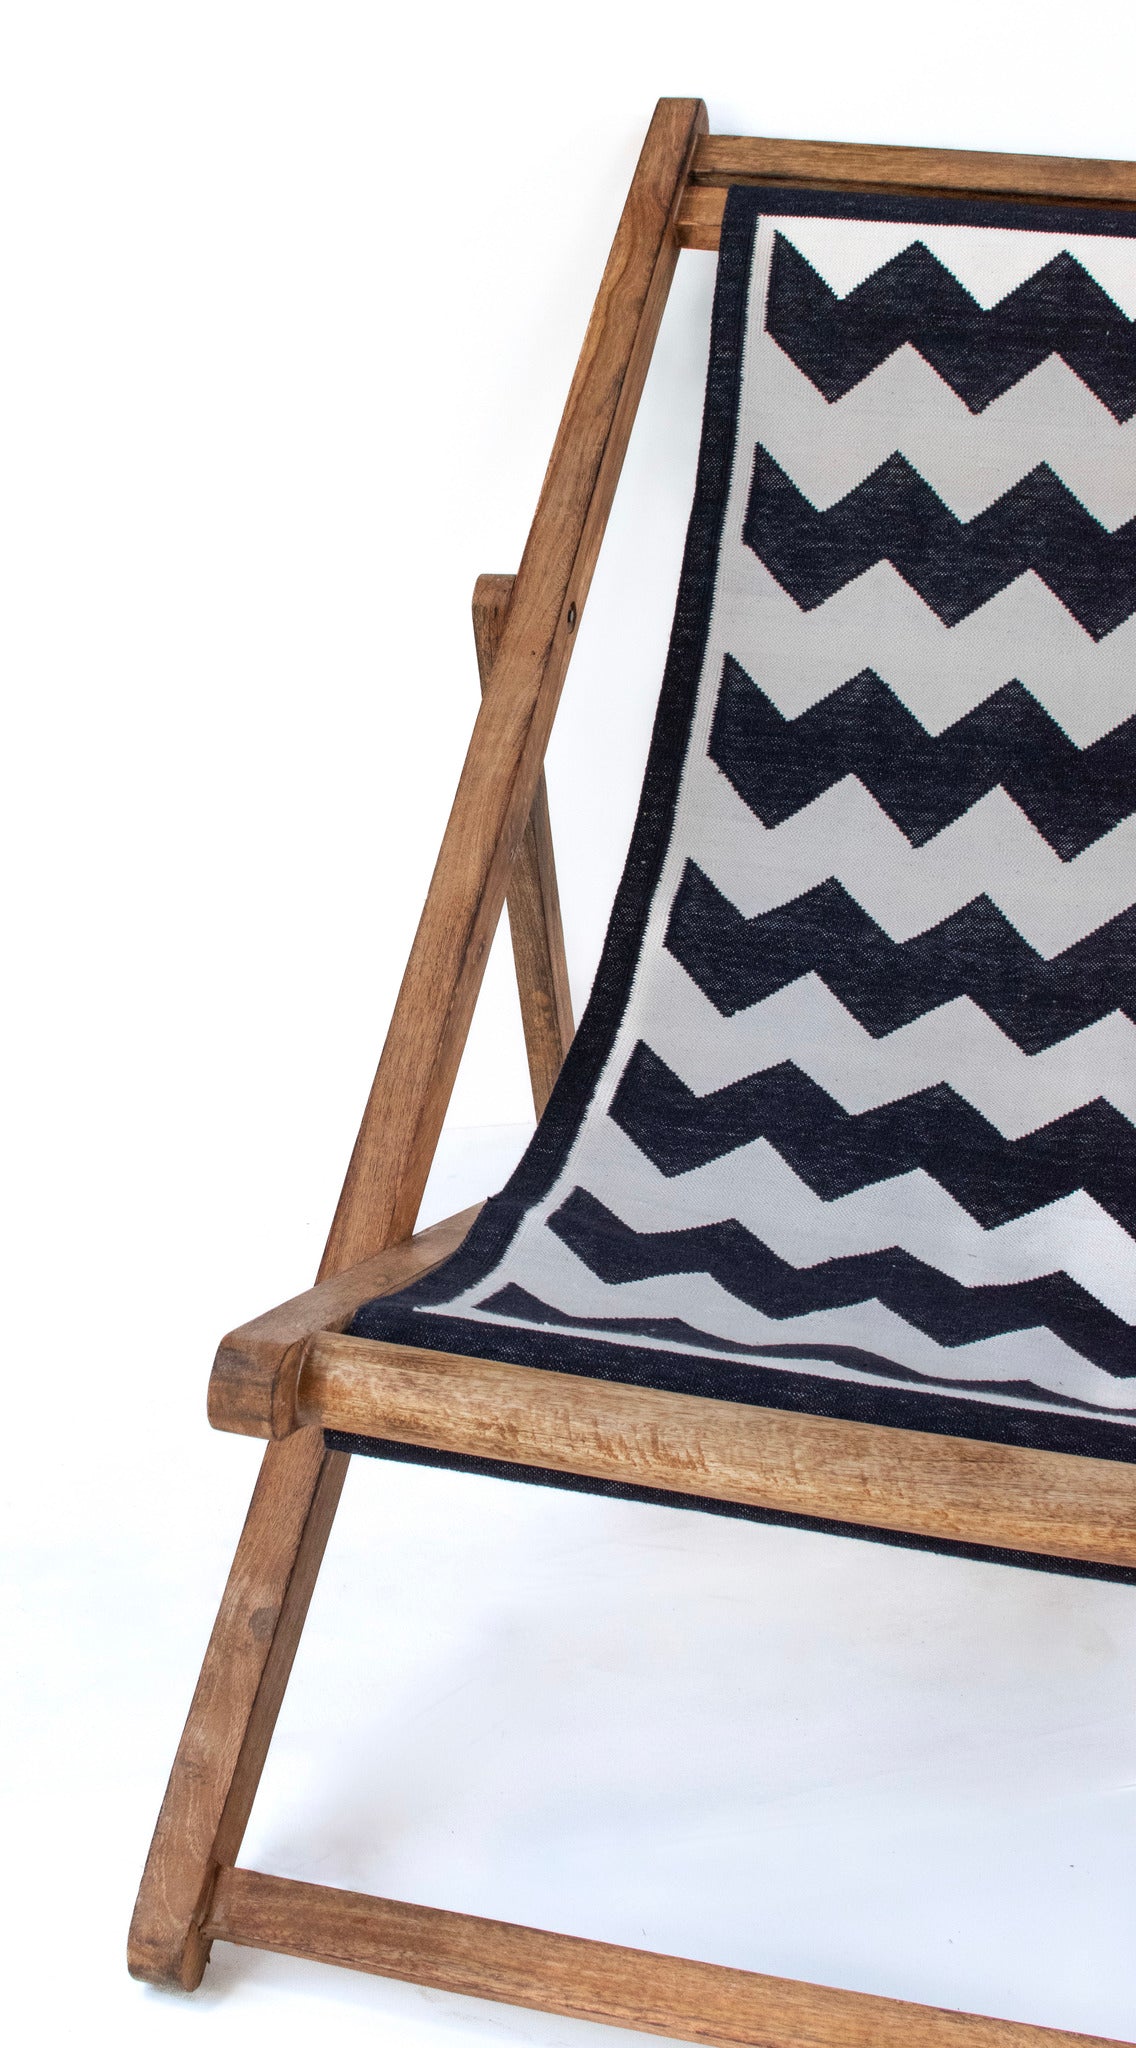 Sling Chair - Rustic Warm Finish with Retro Fabric Seat